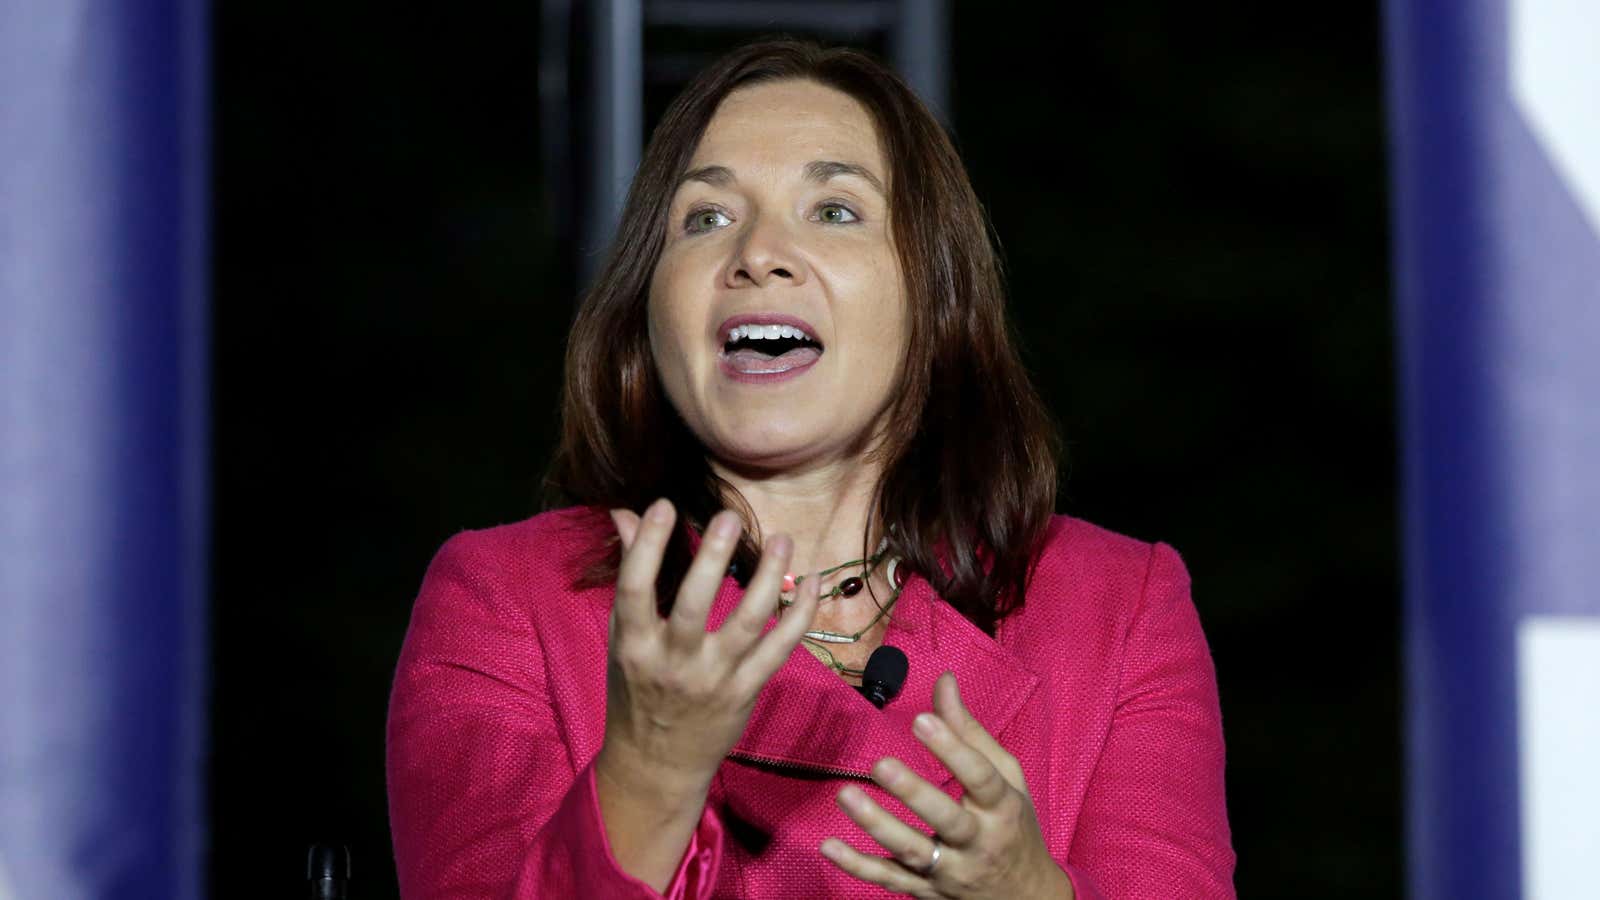 Climate scientist Katharine Hayhoe says her evangelical religion influences her approach to climate change